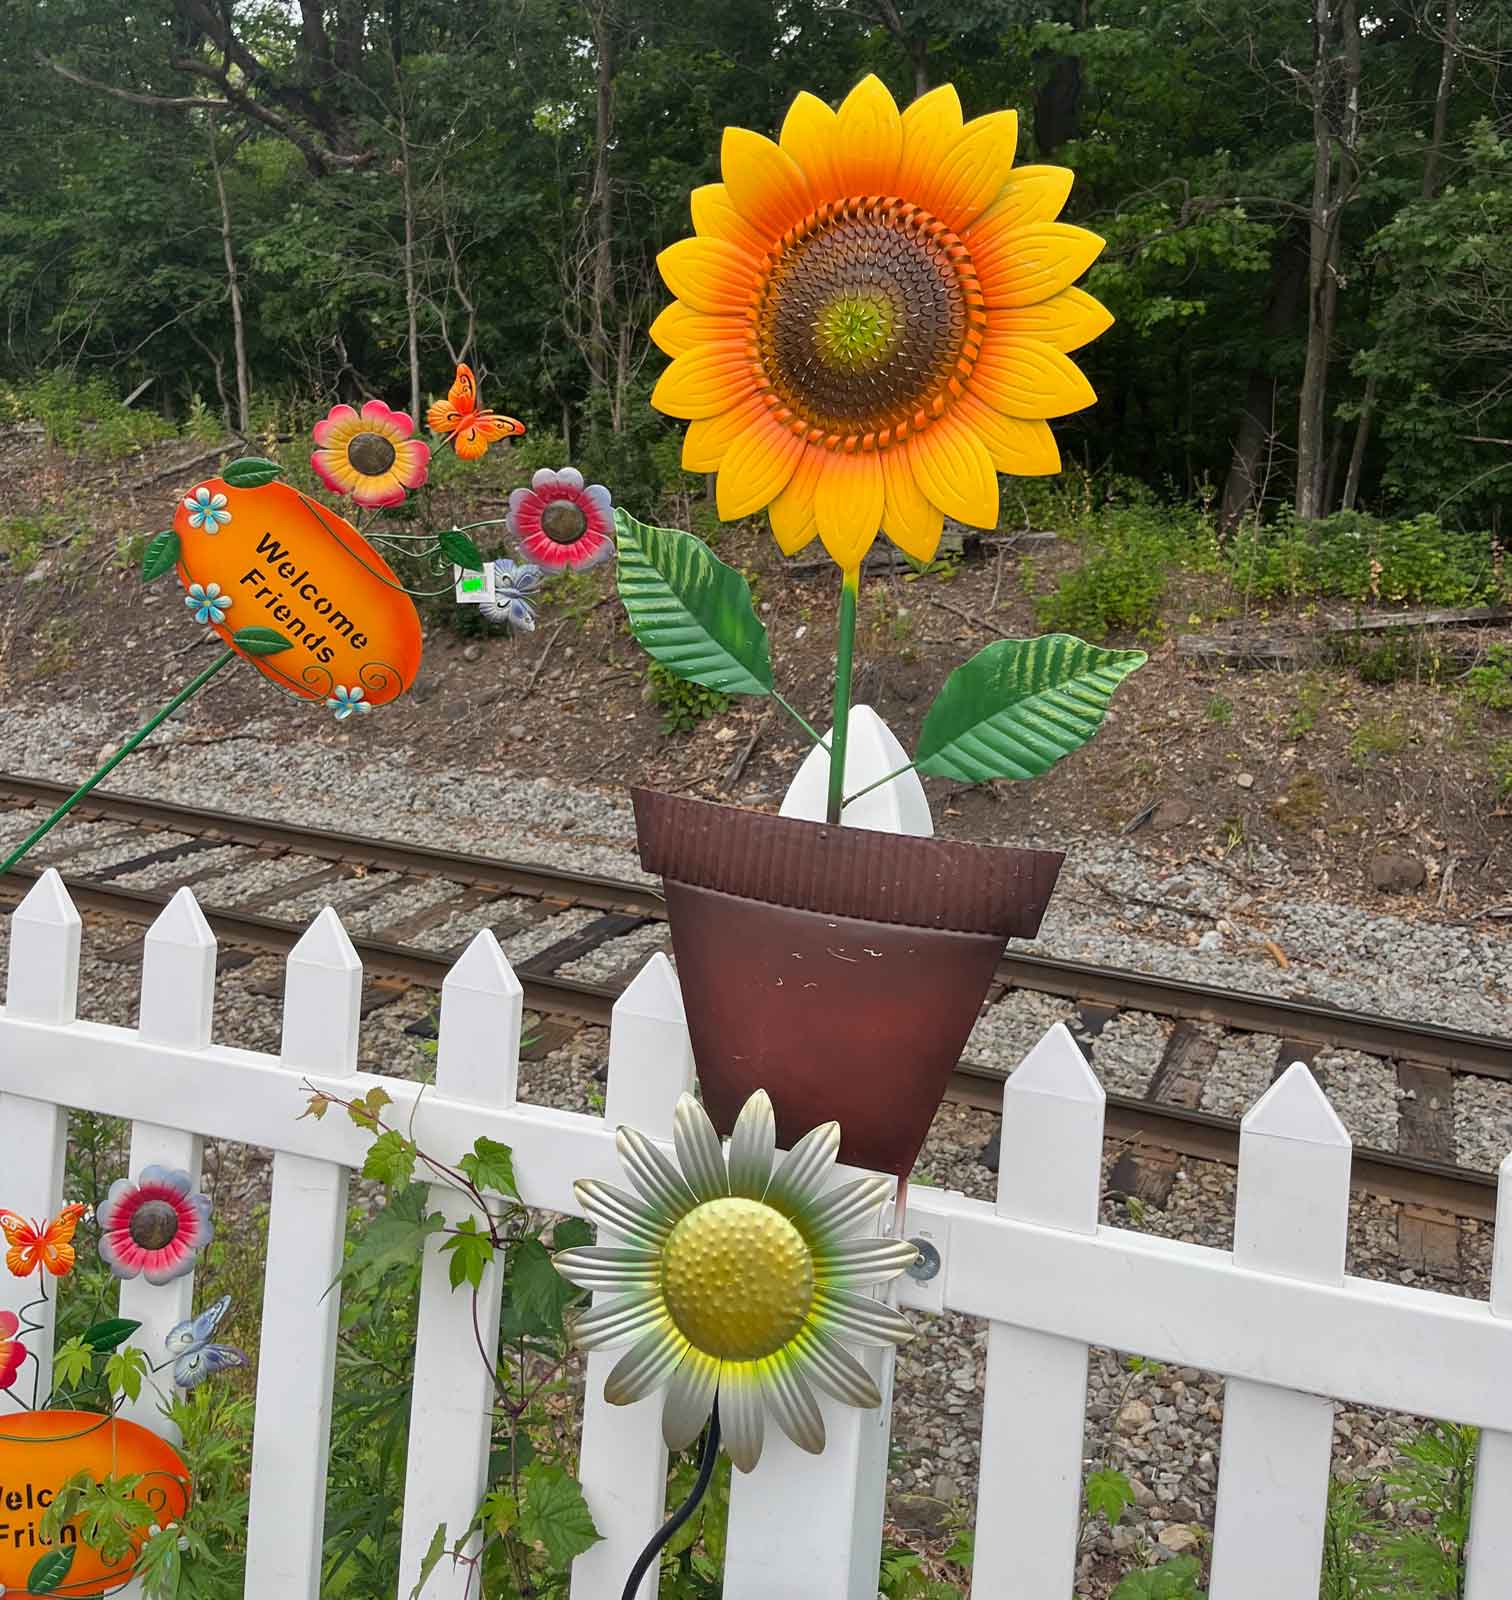 Garden décor actually gives you more opportunity for self-expression than plants. There is gardening décor available to match every interest imaginable. Read more at Gardening Know How: What Are Pros And Cons Of Garden Art DÃ©cor https://blog.gardeningknowhow.com/gardening-pros-cons/pros-and-cons-of-garden-art/